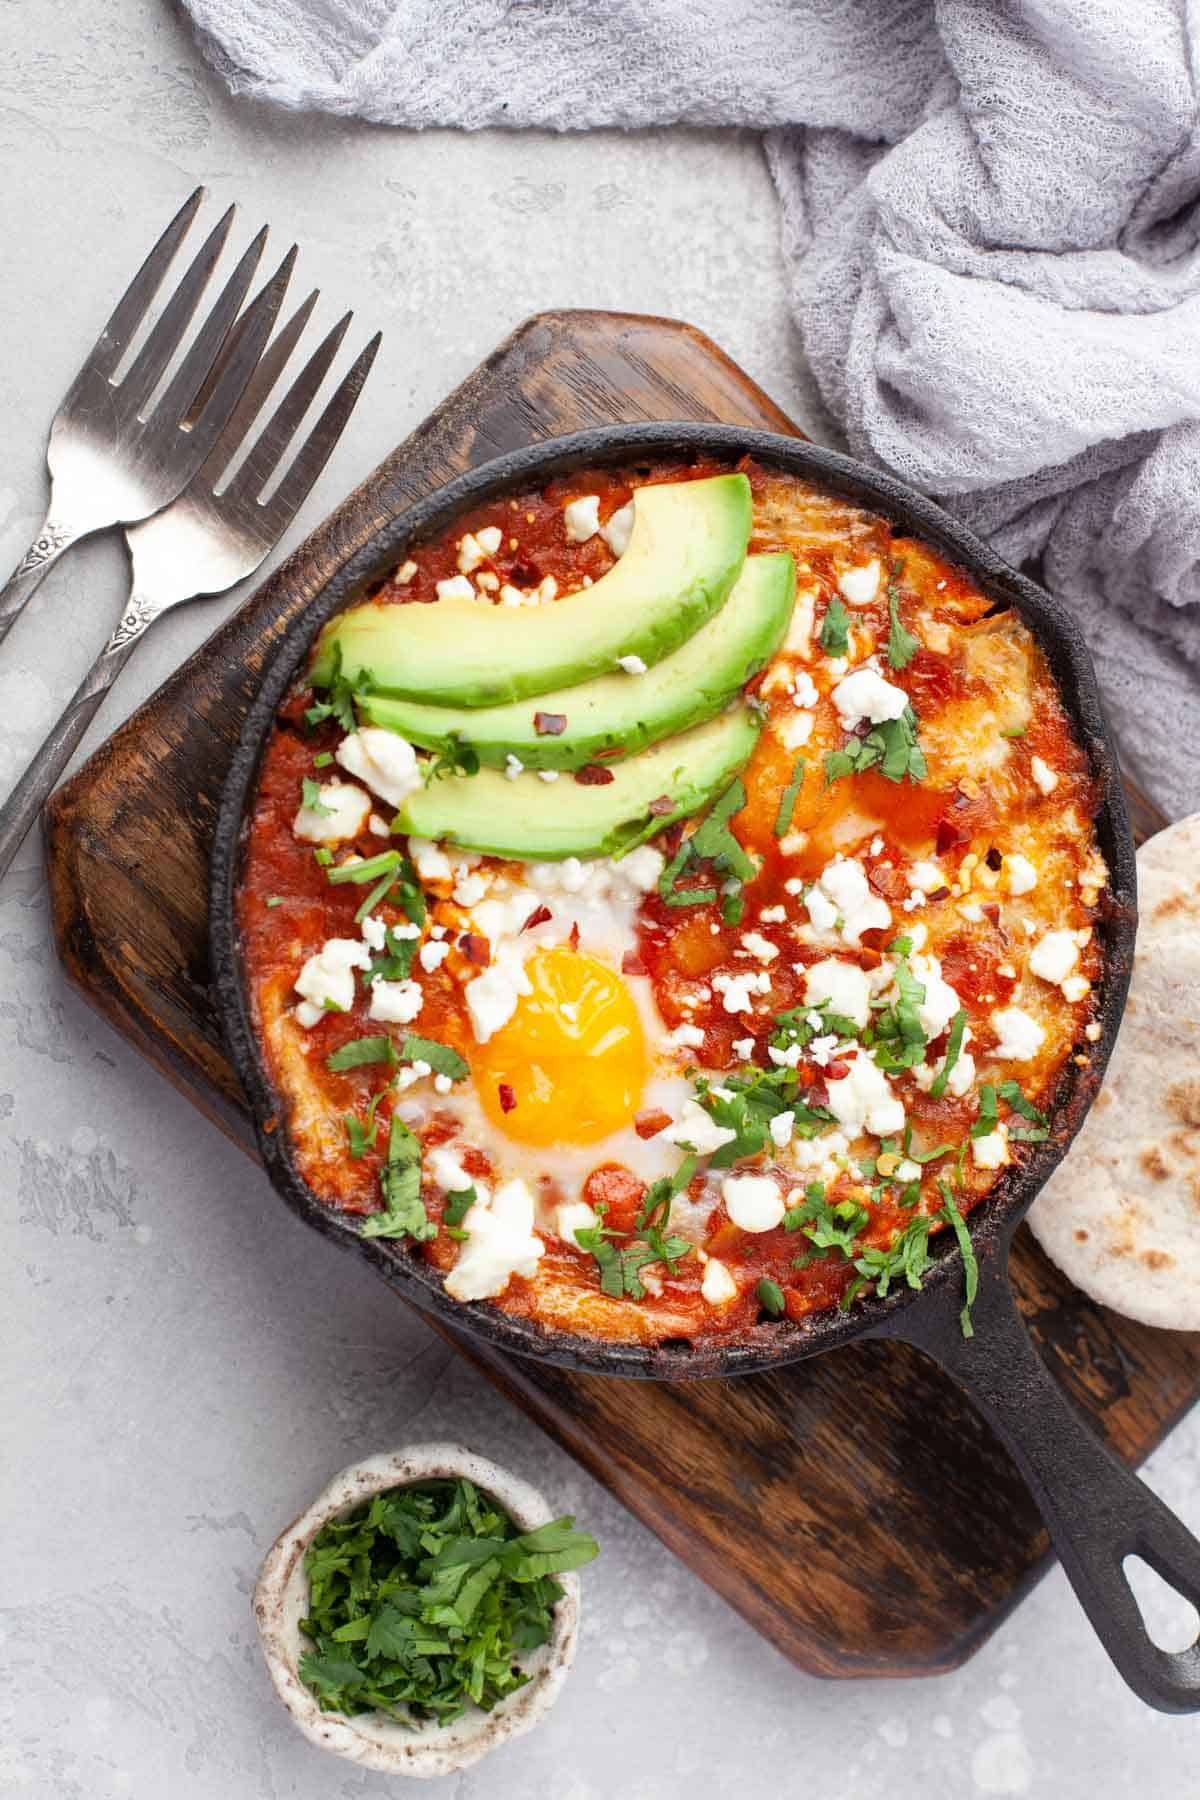 Over easy eggs in a tomato sauce cooked in a cast iron skillet topped with feta, avocado and cilantro.